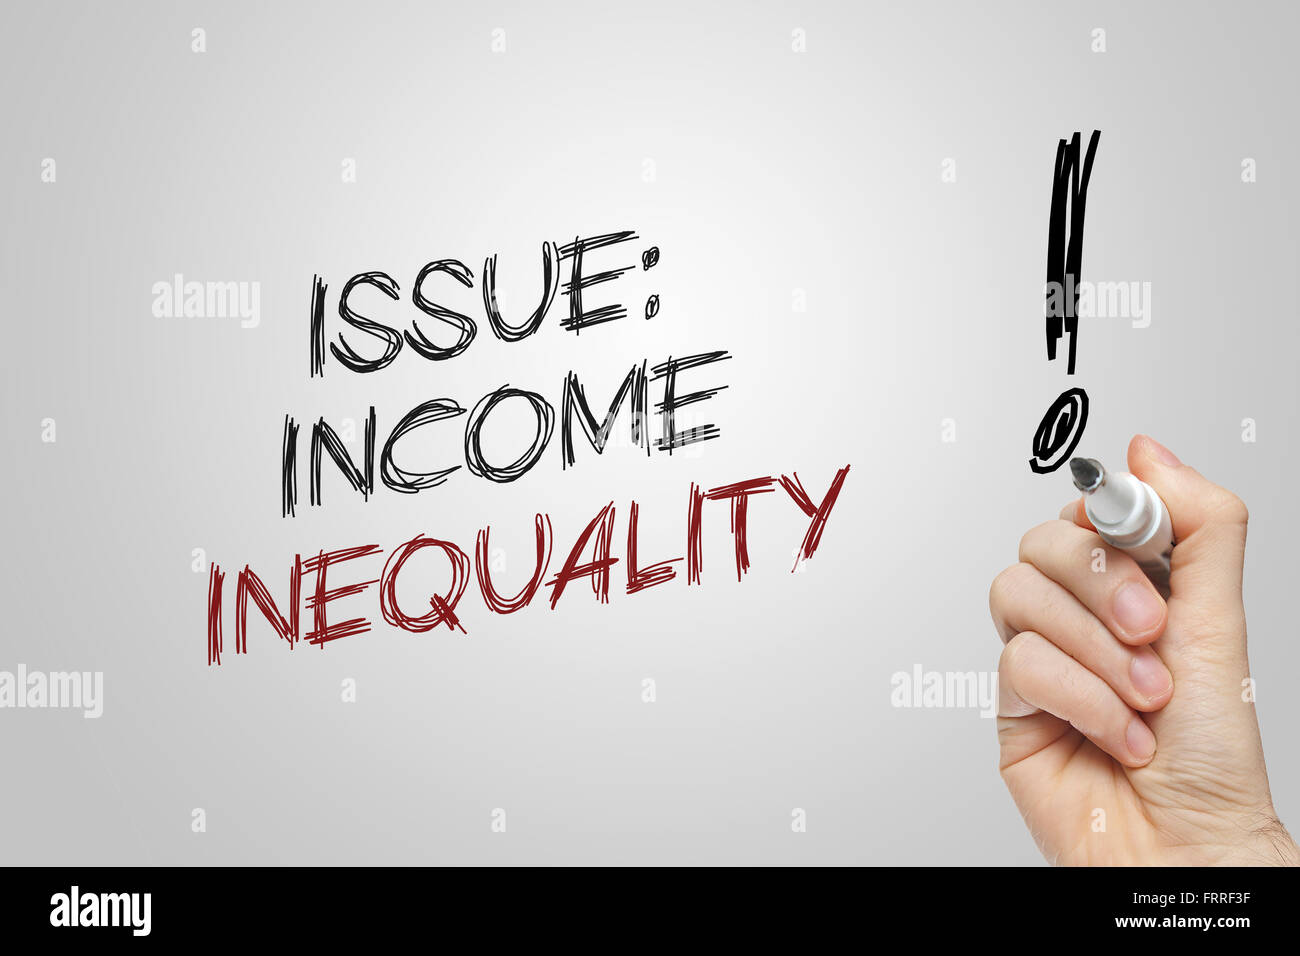 Hand writing issue income inequality on grey background Stock Photo